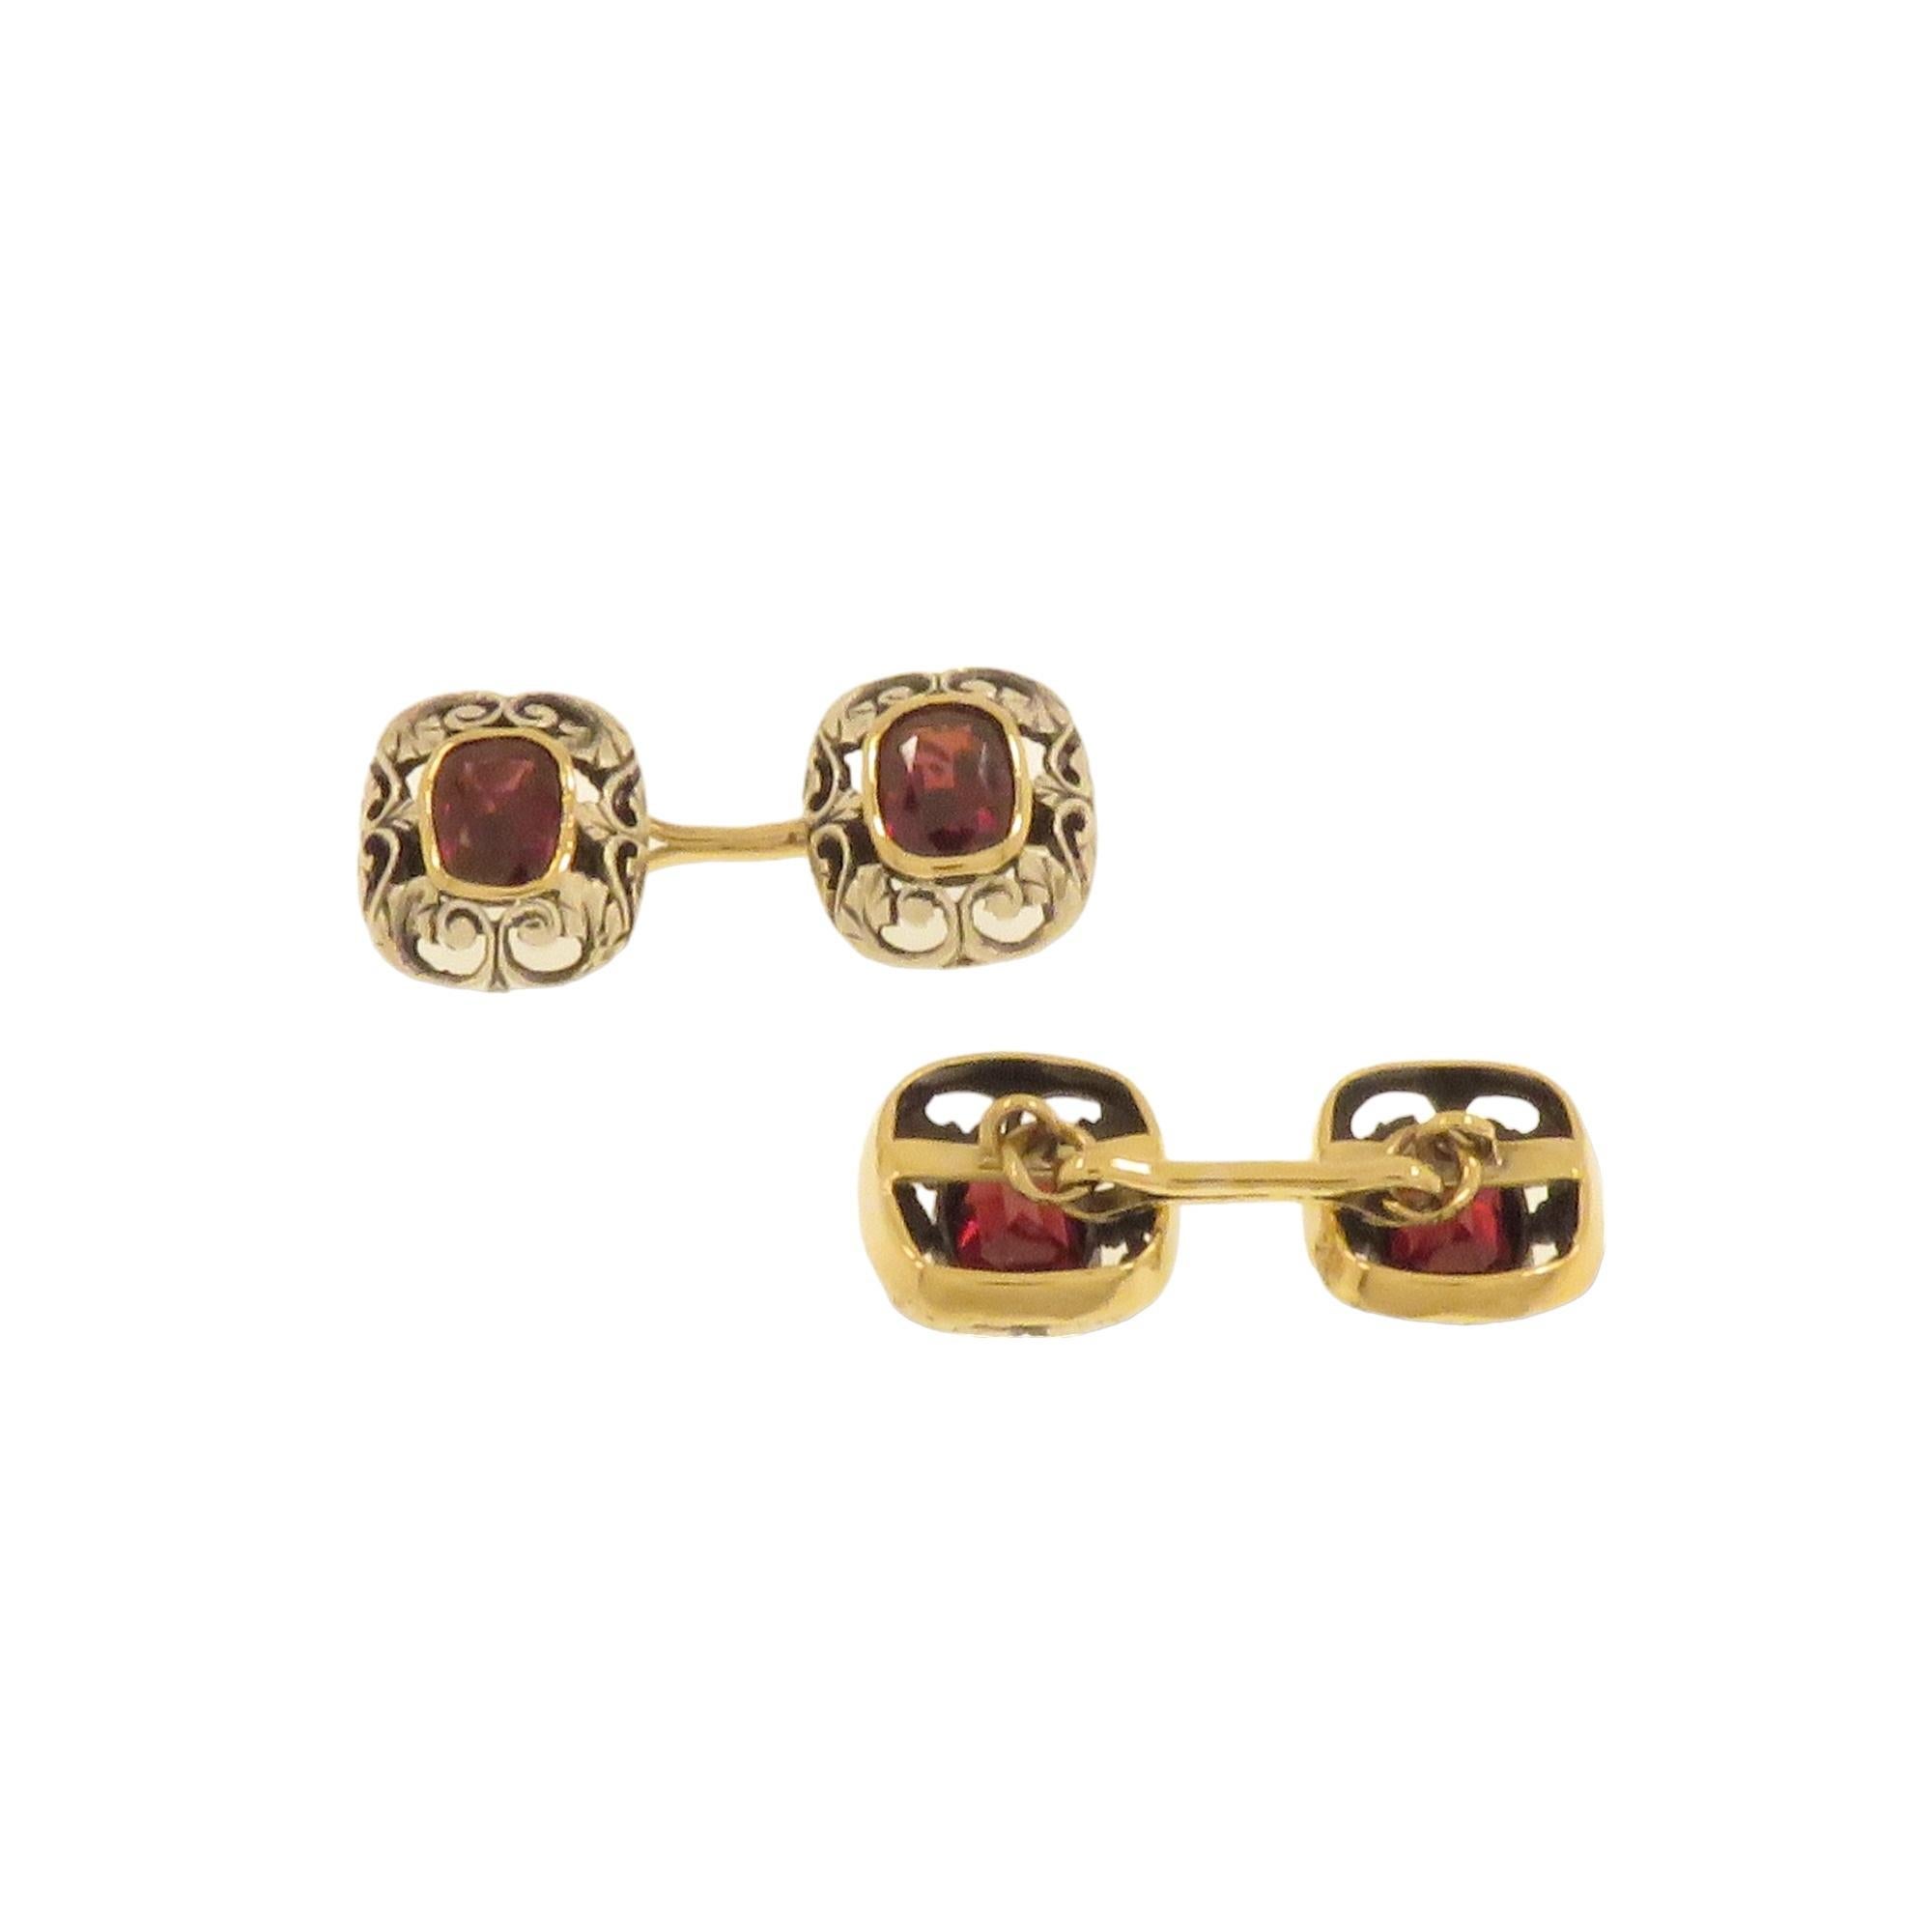 Handmade antique cufflinks, 14k rose gold for the lower part and pierced and engraved silver for the upper part with a cushion-cut garnet set in the center. They are made in the early 20th century when silver was used as the white metal as white